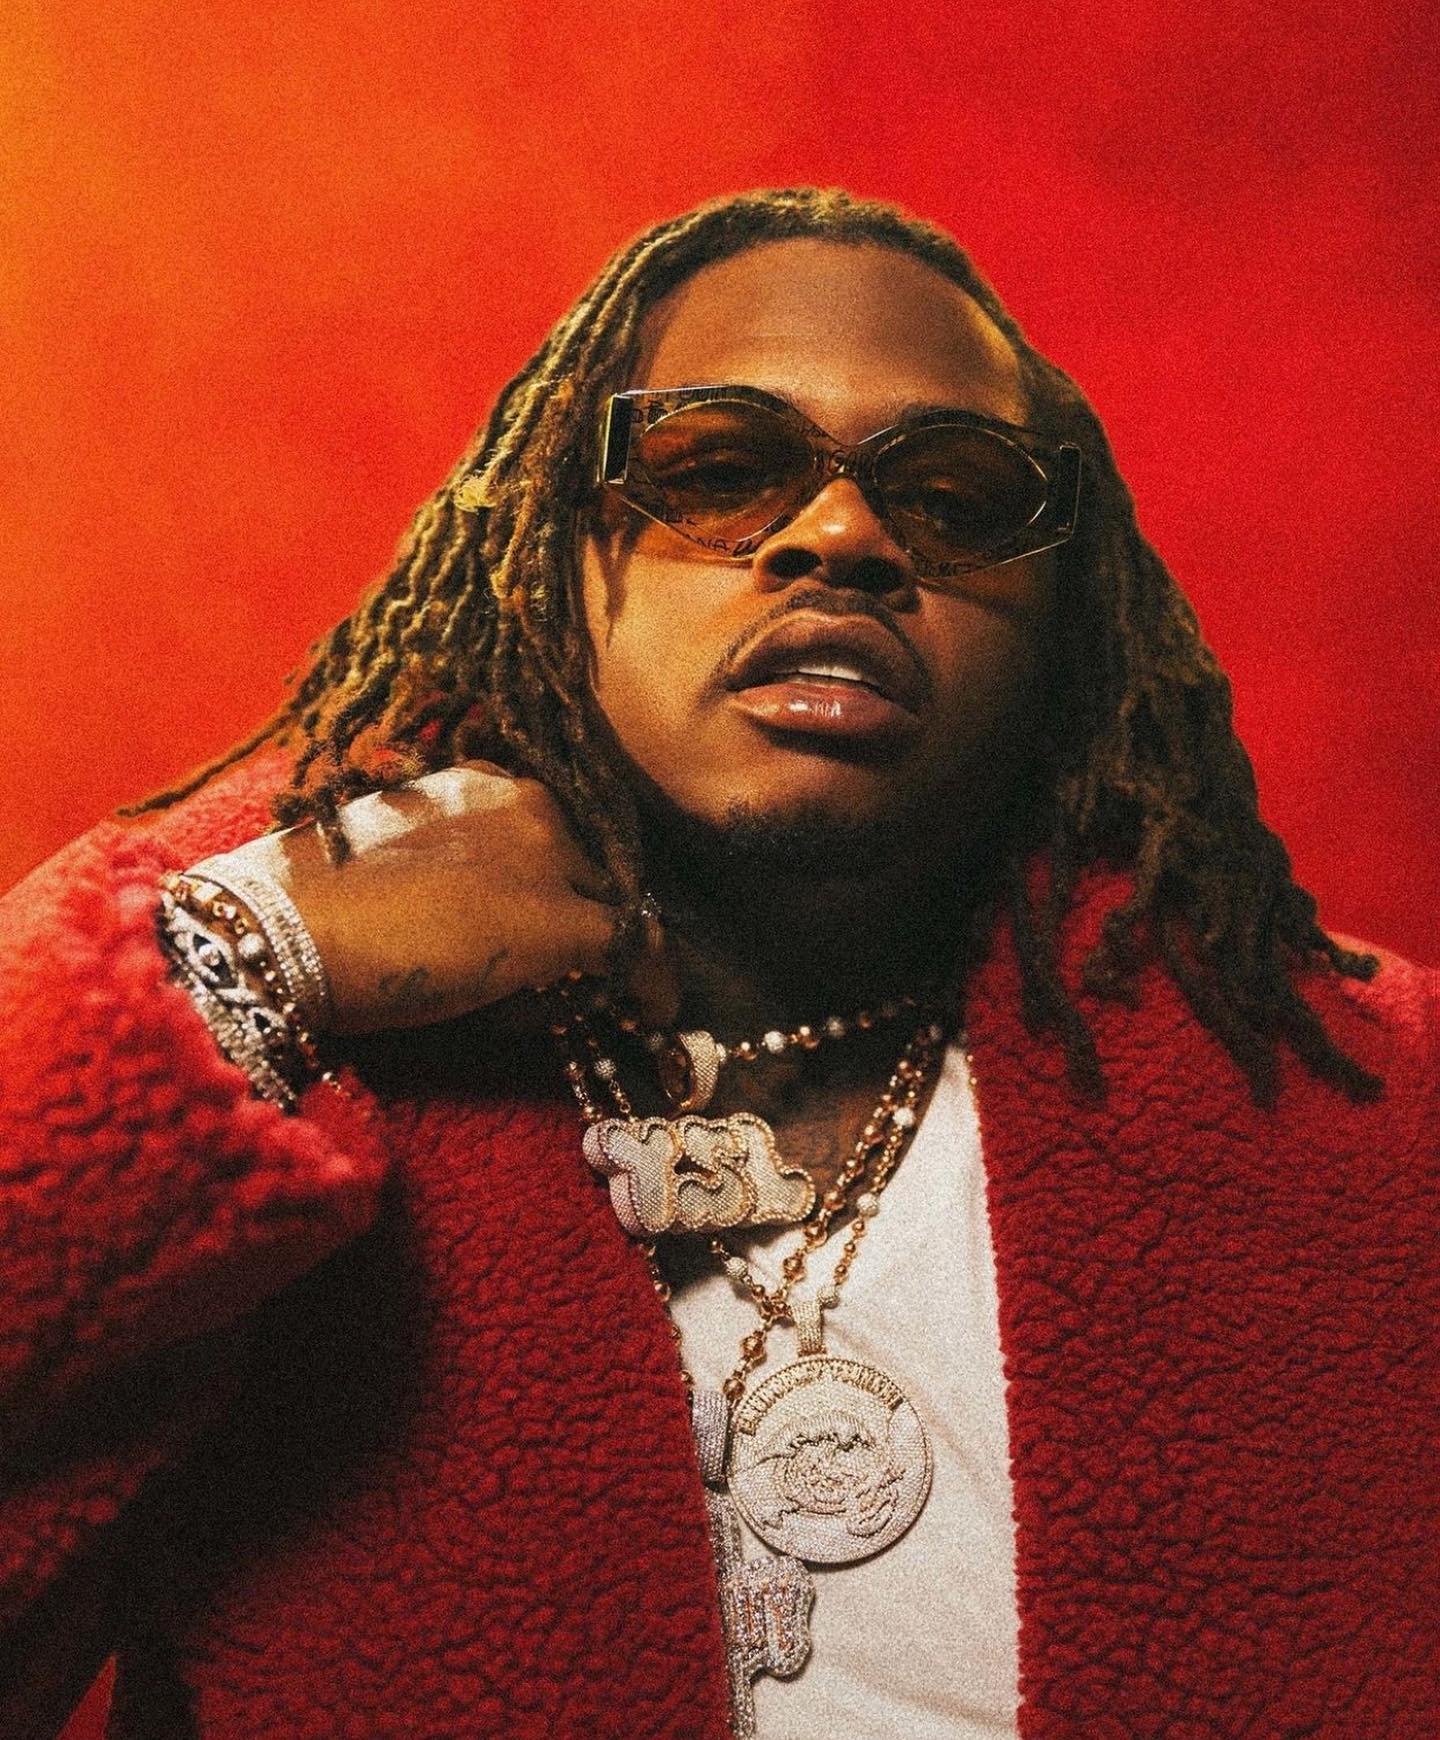 @gunna just secured his second number 1 album on @billboard! ‘DS4EVER’ sold 153,300 units while @theweeknd’s new album ‘Dawn FM’ sold 148,000 units.